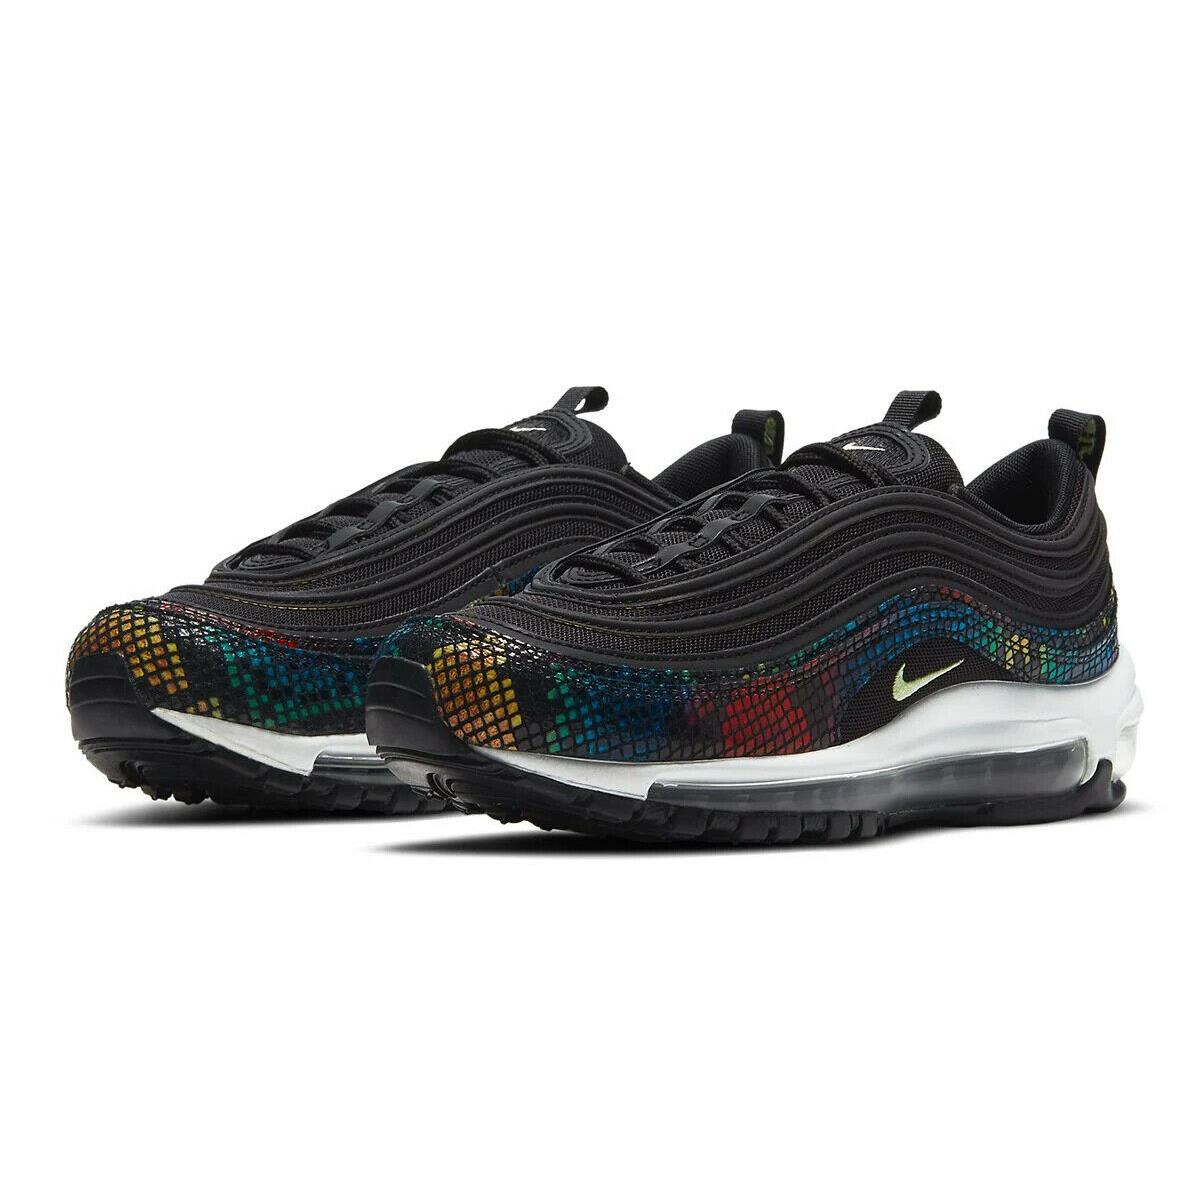 Nike Air Max 97 SE Womens Size 7.5 Sneaker Shoes CW5595 002 Rainbow Snake